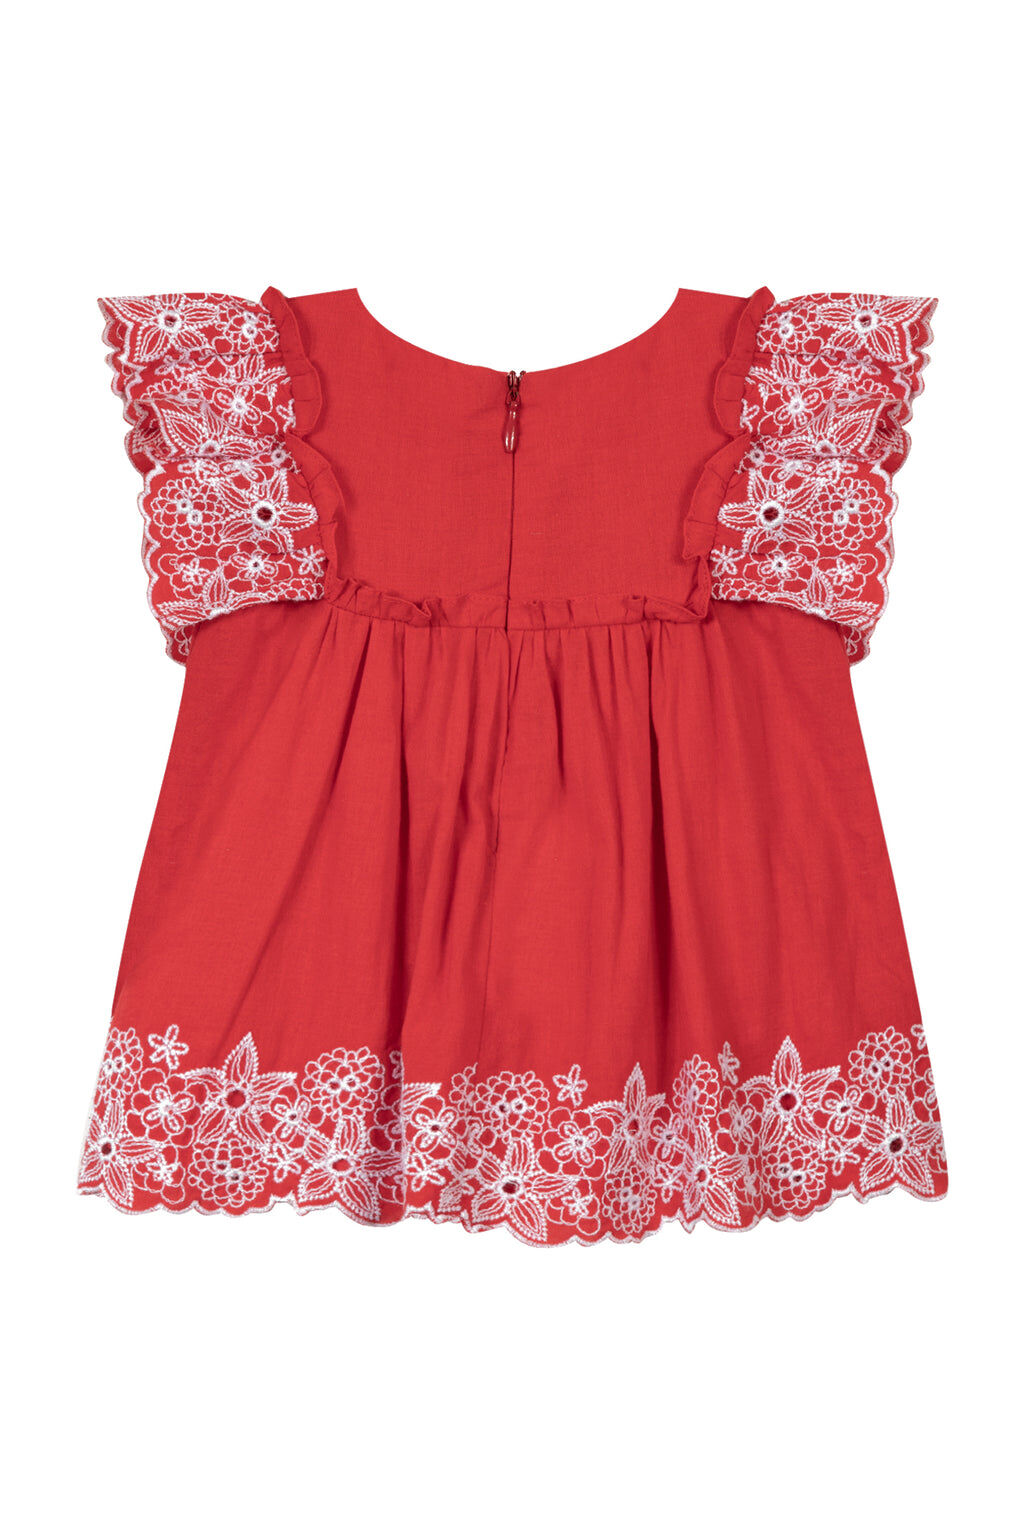 Blouse - Coquelicot broderies florales